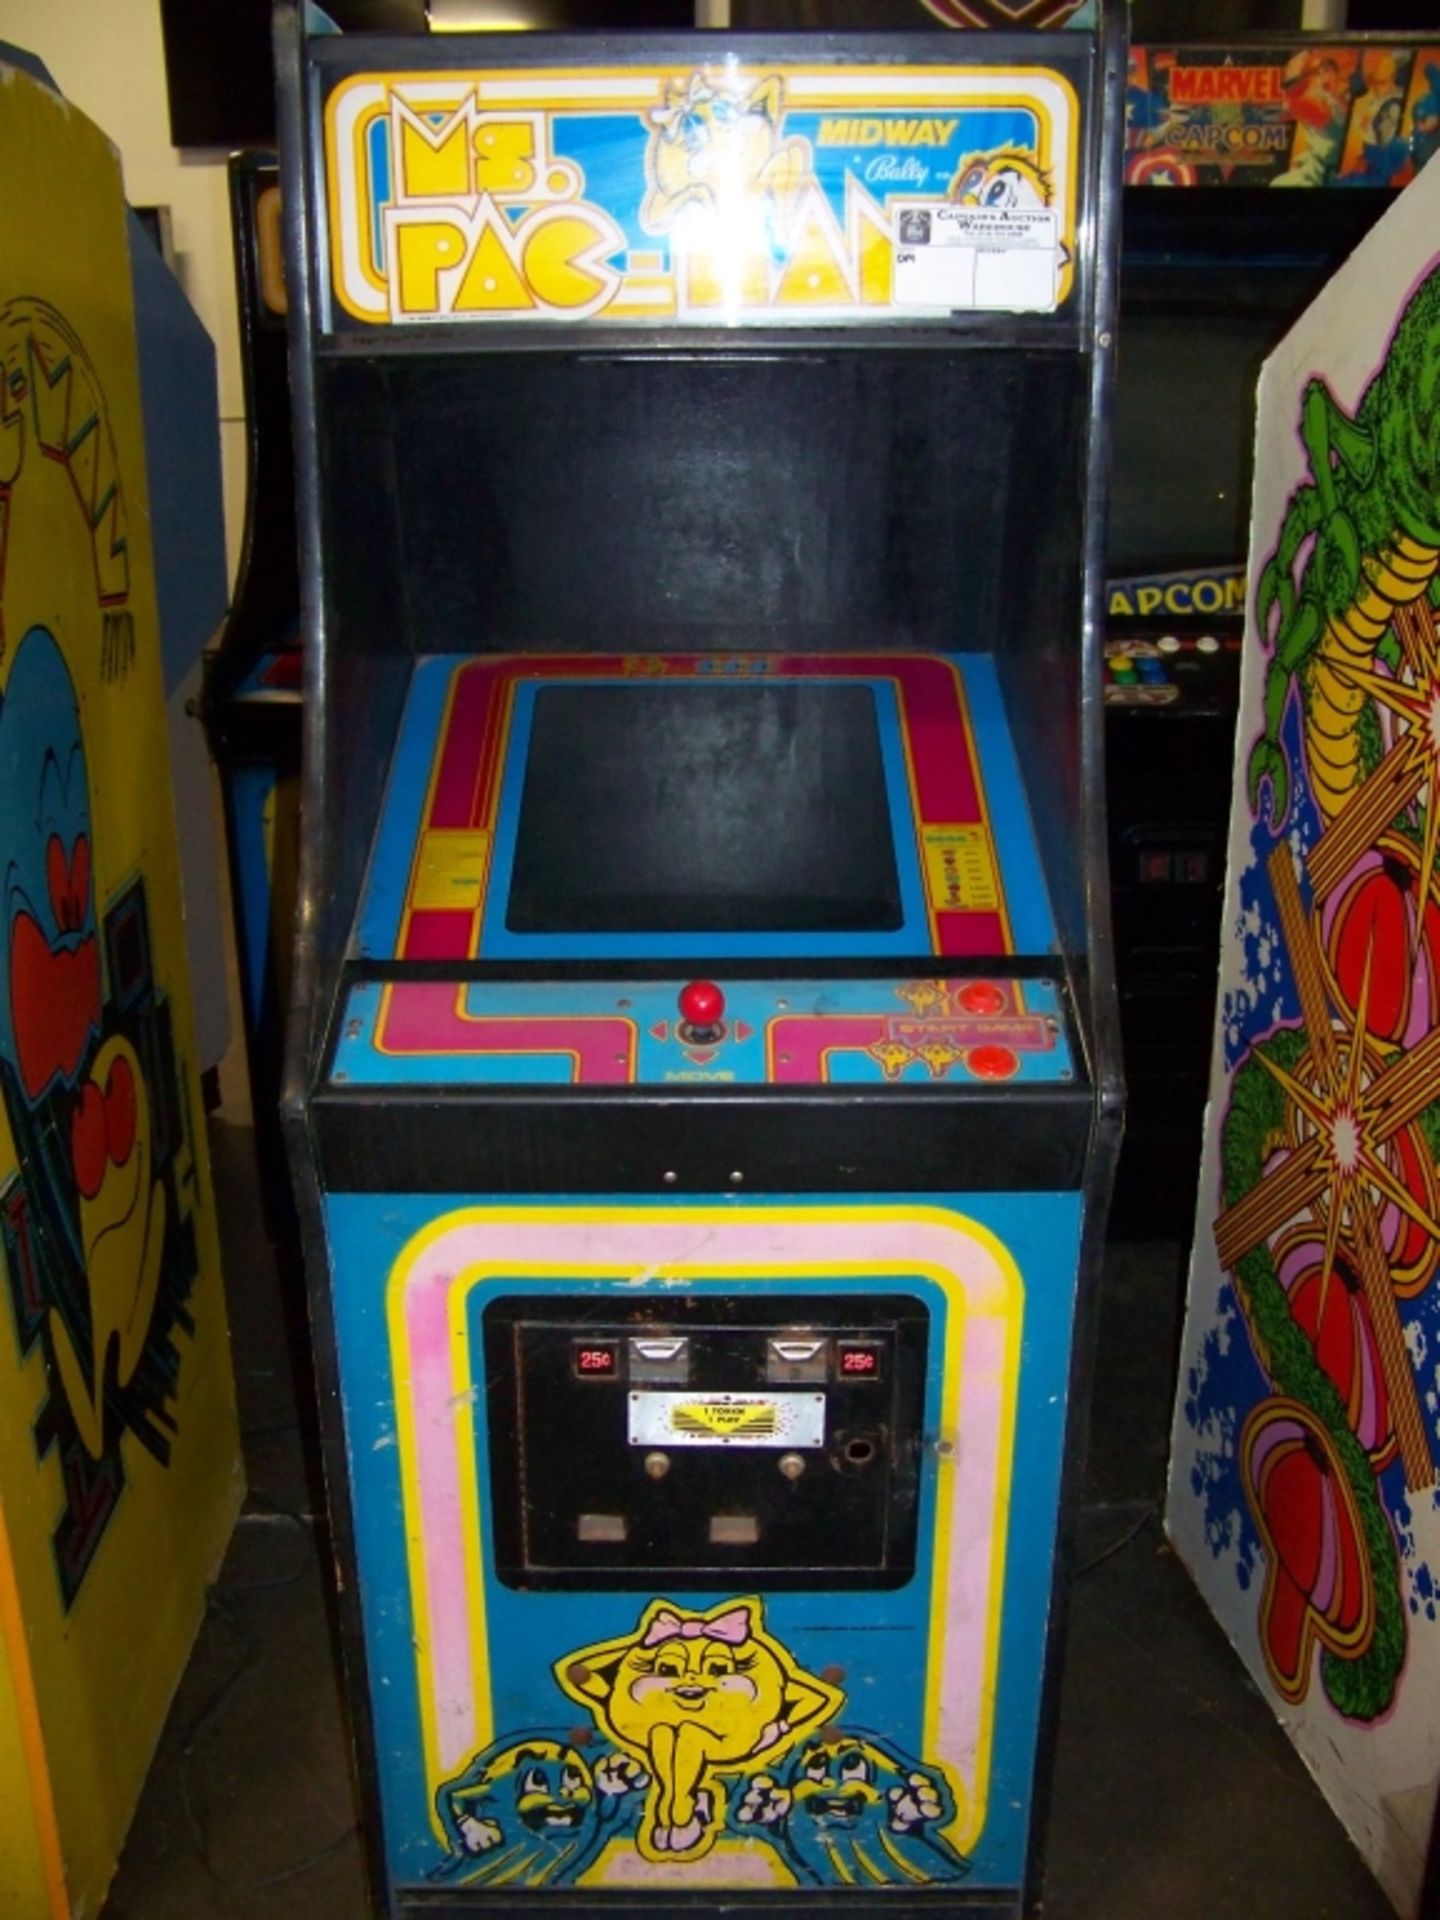 MS PACMAN CLASSIC ARCADE GAME MIDWAY Item is in used condition. Evidence of wear and commercial - Image 3 of 4